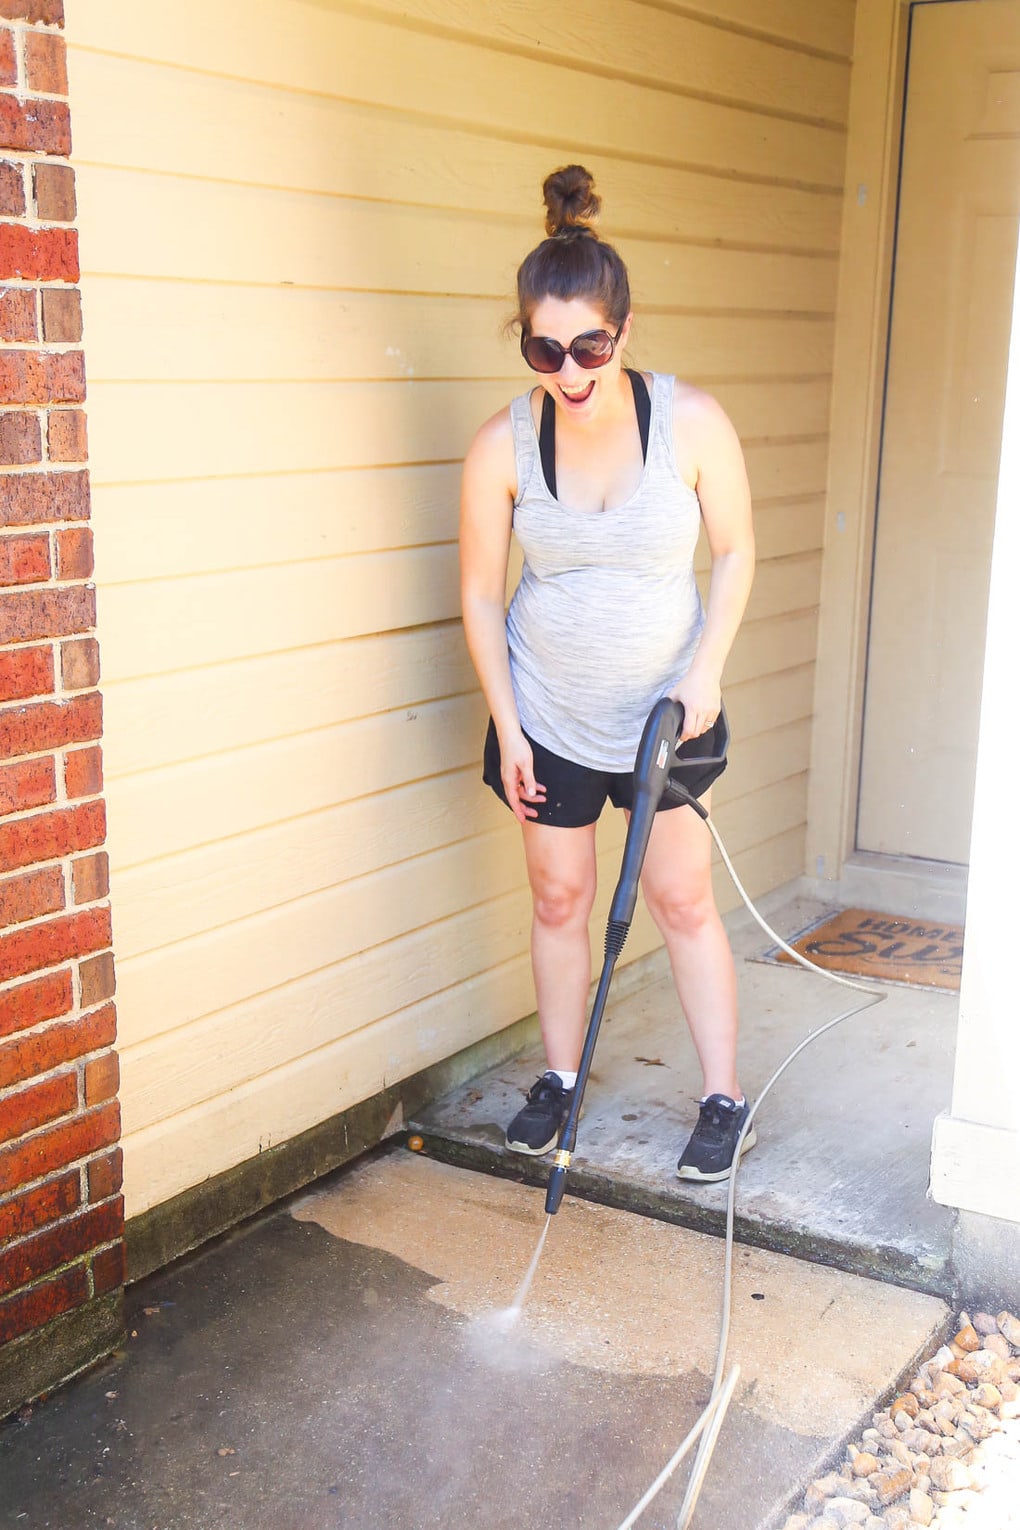 A review of the Ryobi Pressure Washer